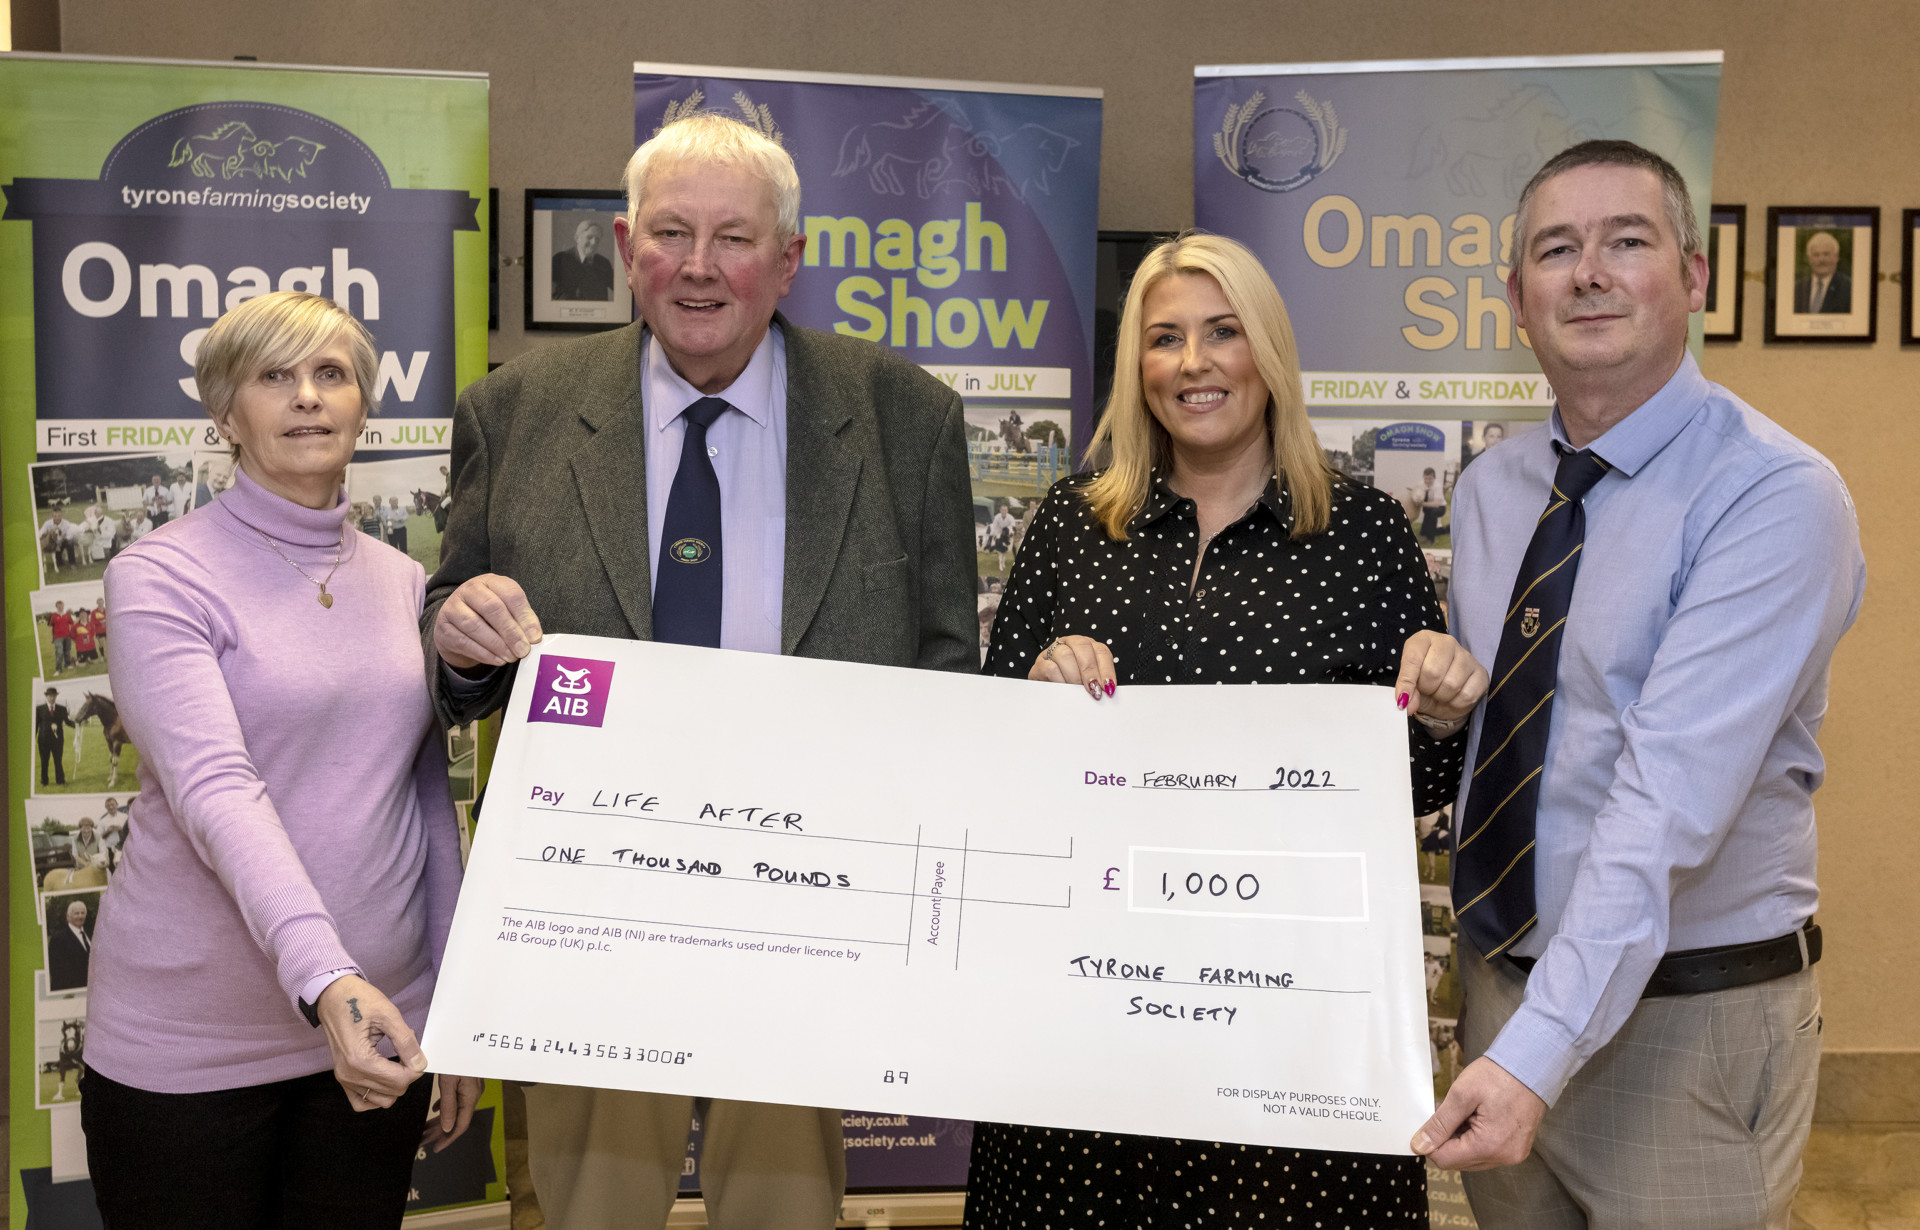 Omagh Show organisers do their bit for charity